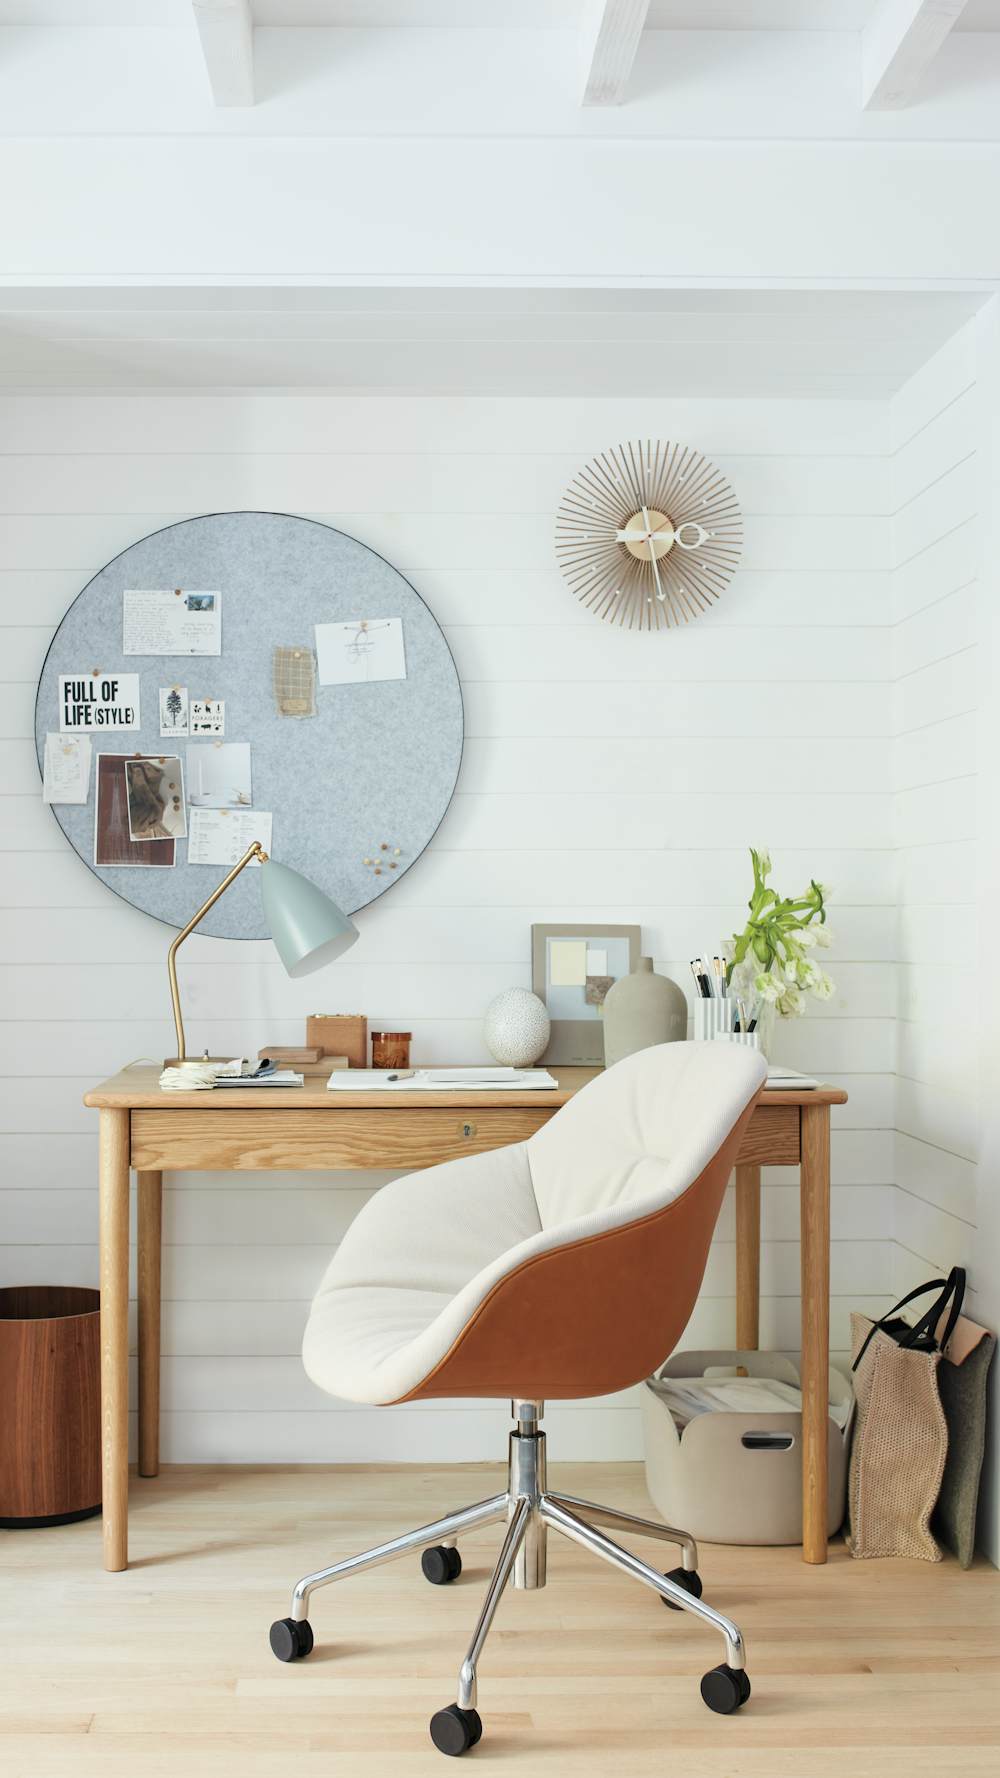 About A Chair 153 Soft Duo Task Armchair and Edel Desk in a home office setting